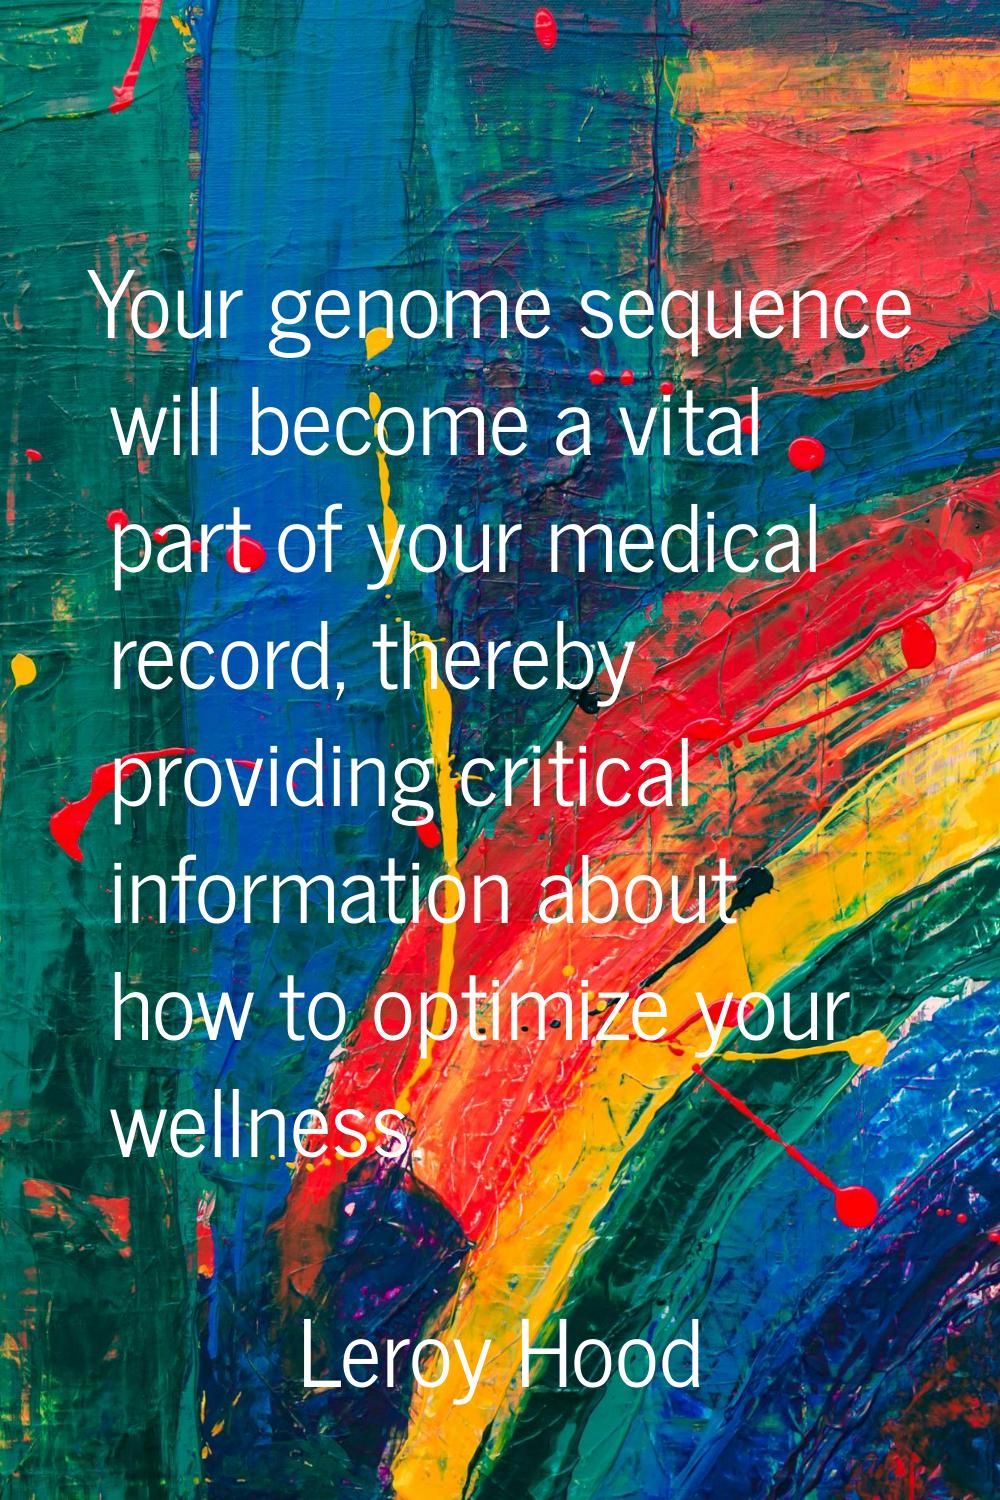 Your genome sequence will become a vital part of your medical record, thereby providing critical in